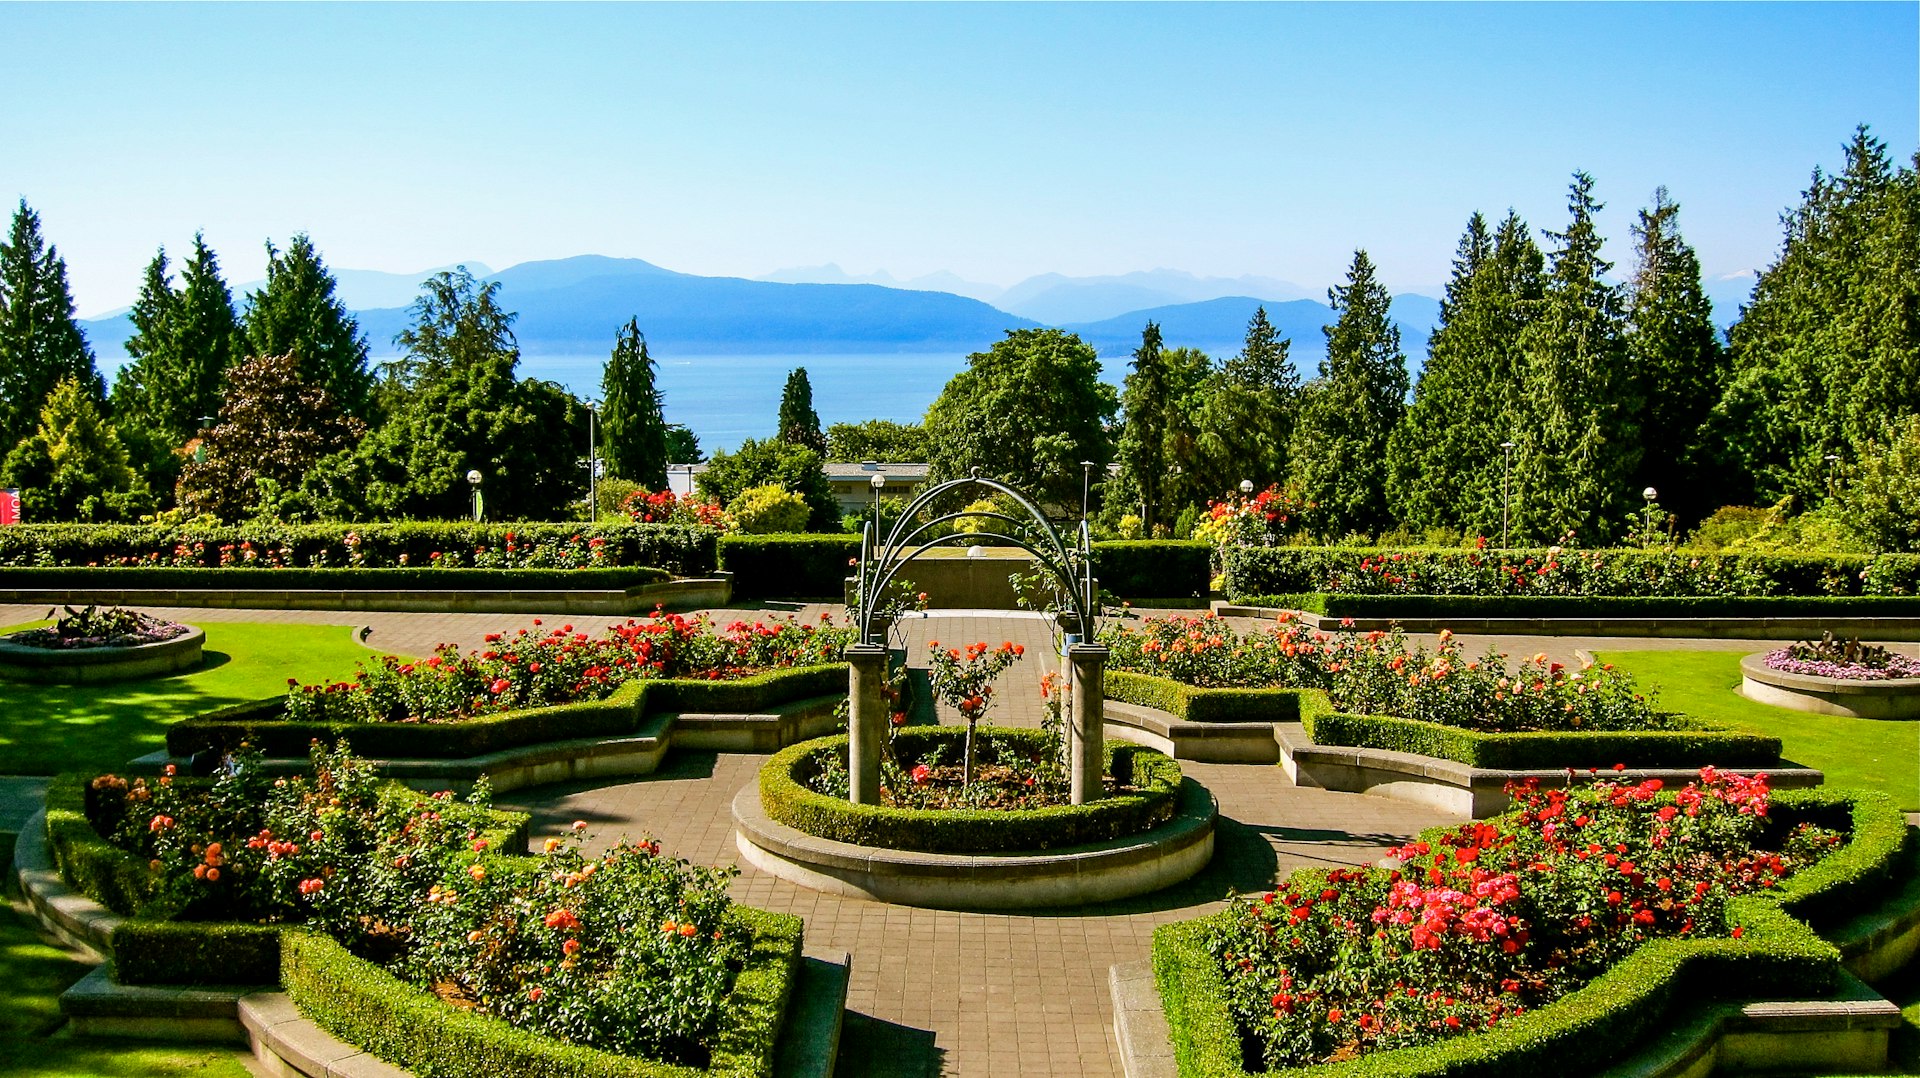 The view from the Rose Garden overlooks the North Shore mountains © John Lee / Lonely Planet